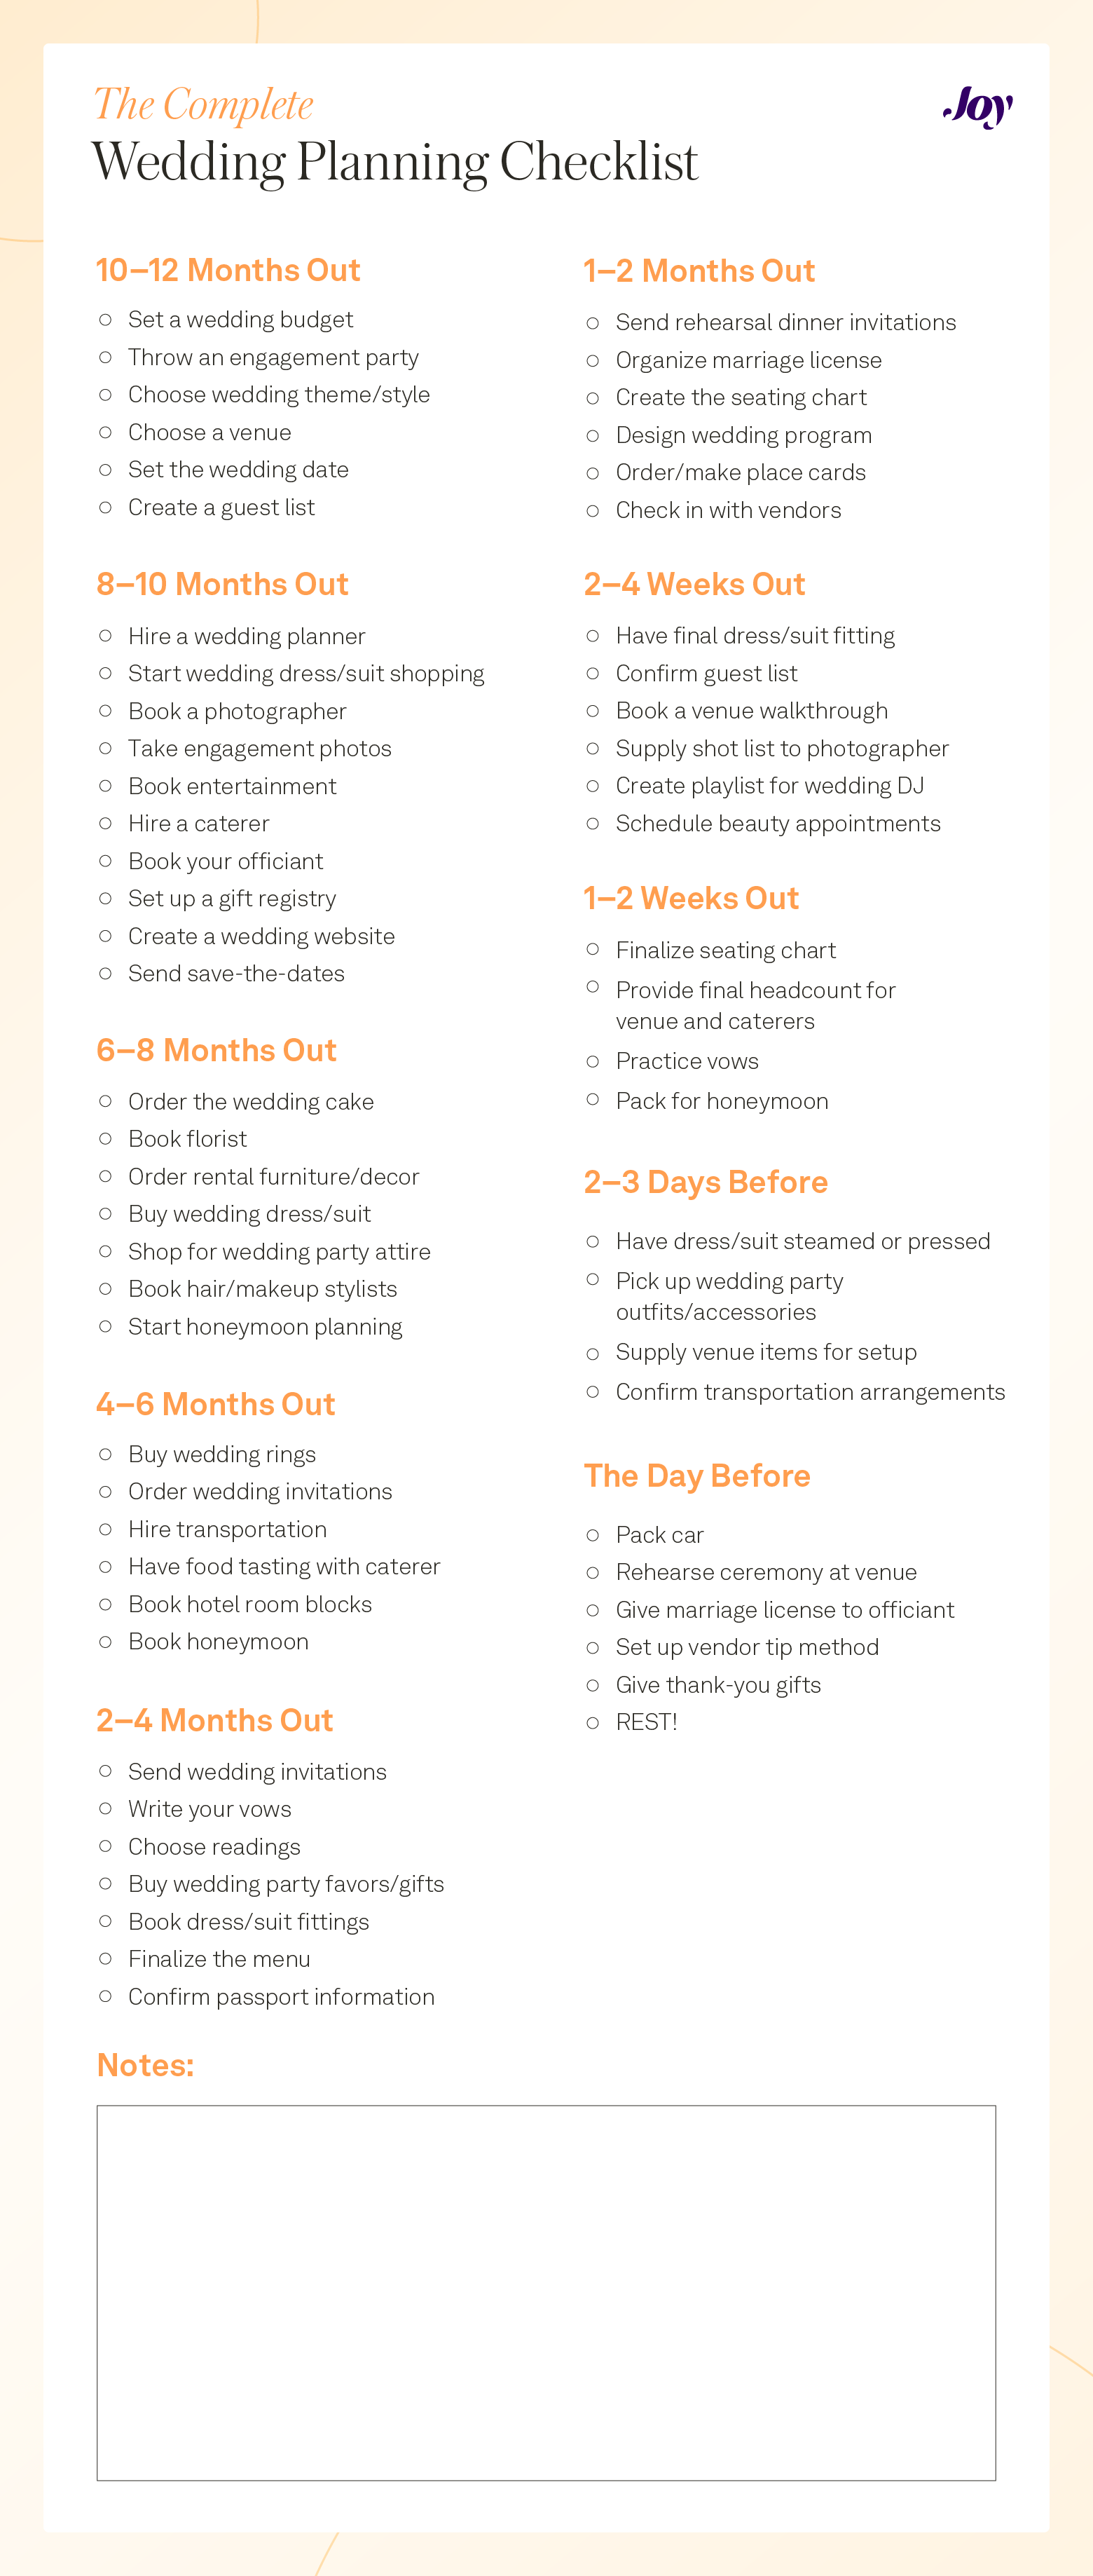 printable wedding planning checklist of tasks to do each month before the wedding date.